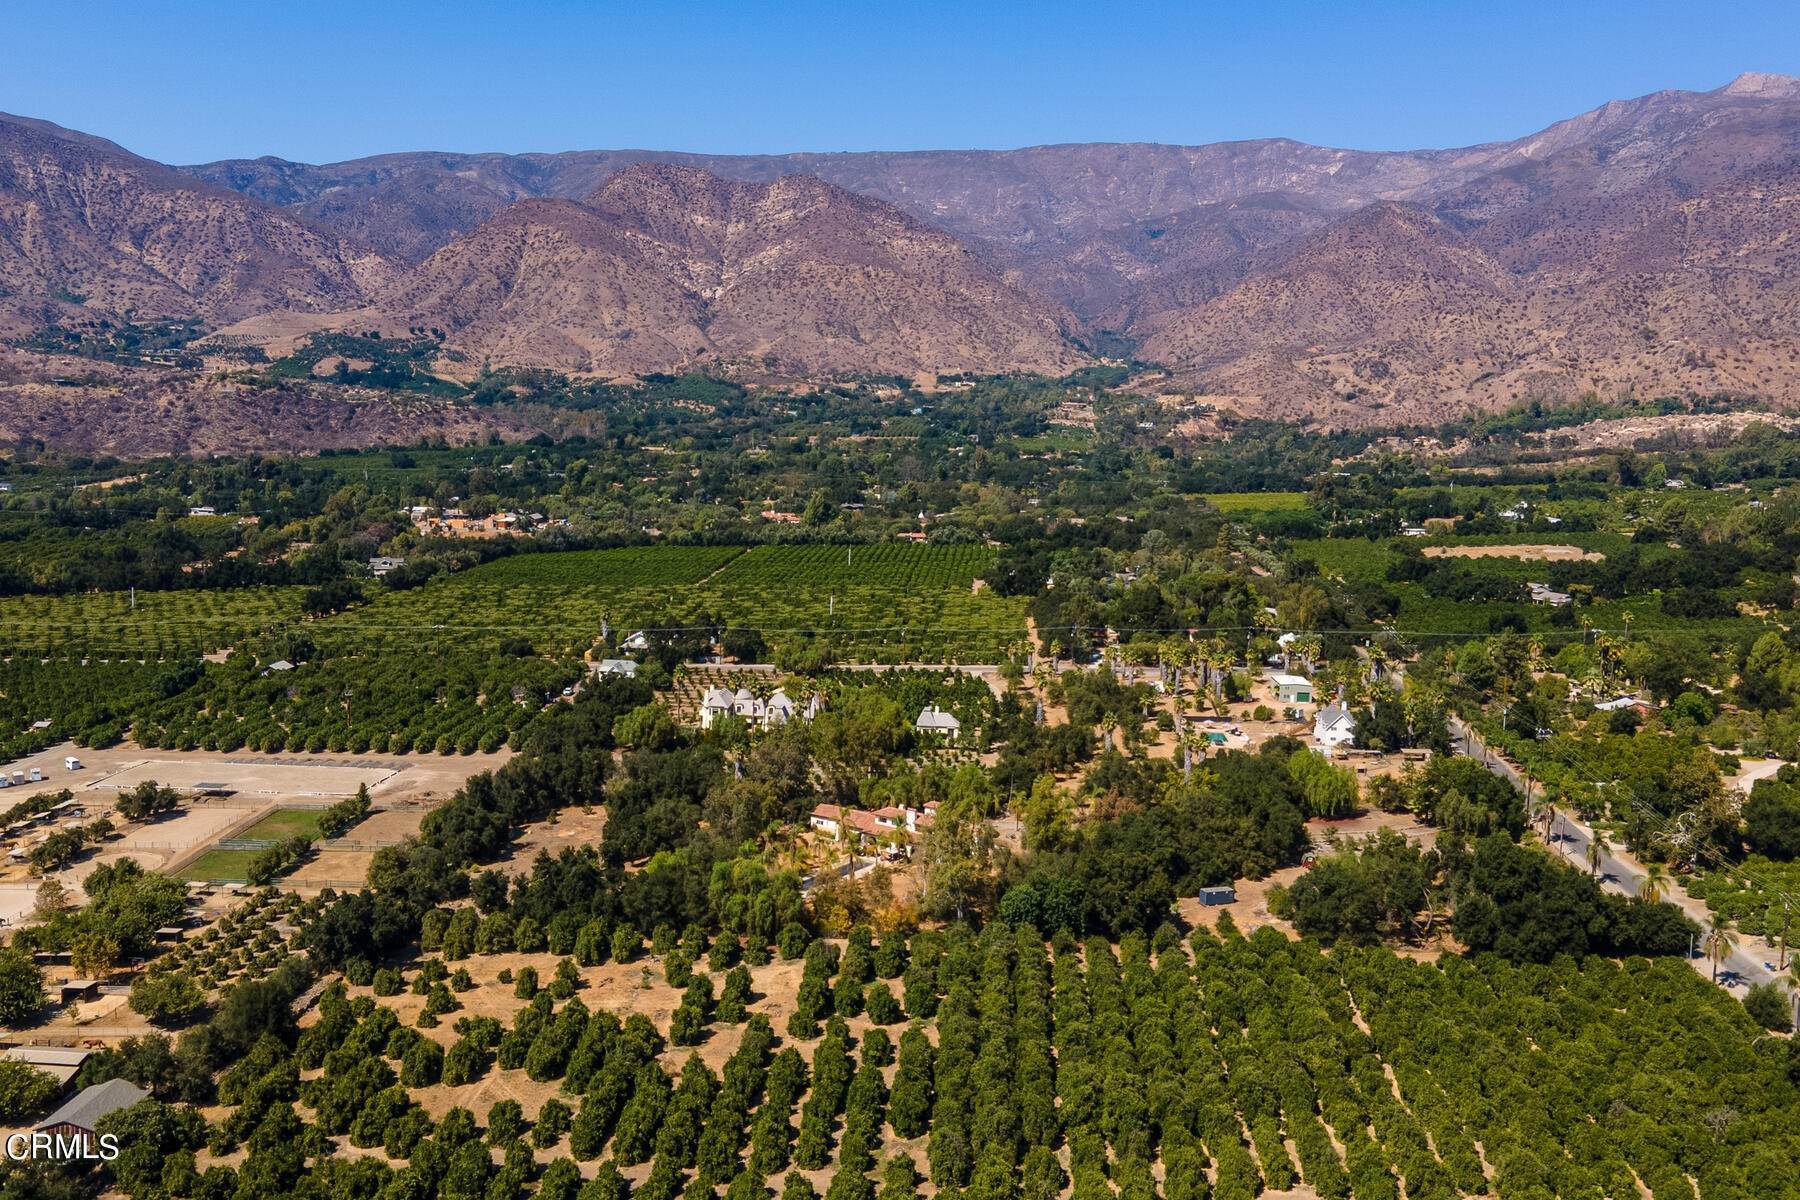 Land at 567 McNell Road Ojai, California 93023 United States